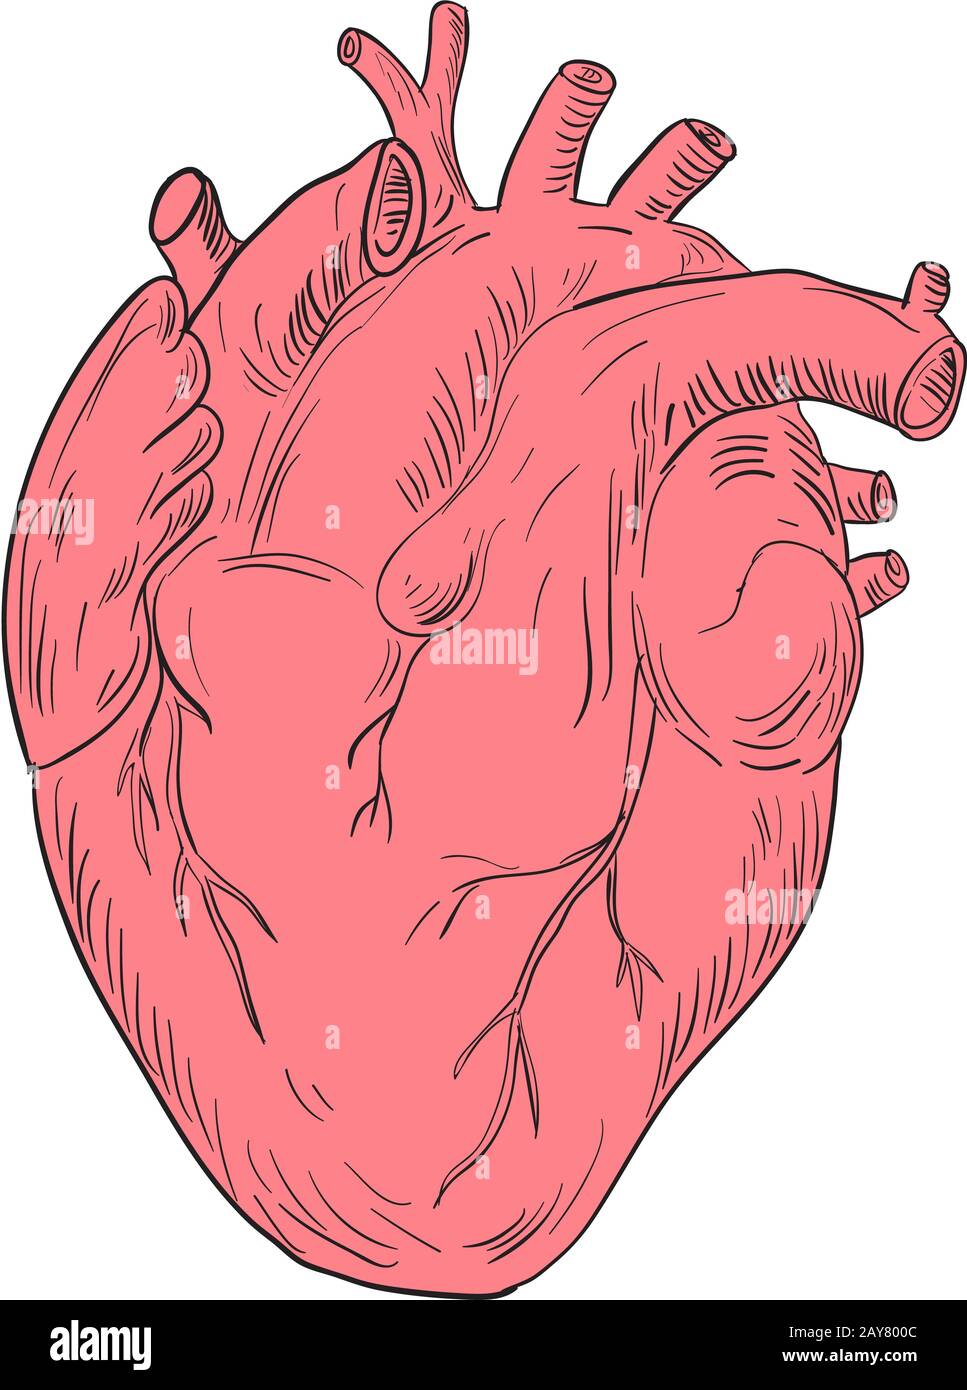 Heart Anatomy Drawing High Resolution Stock Photography And Images Alamy